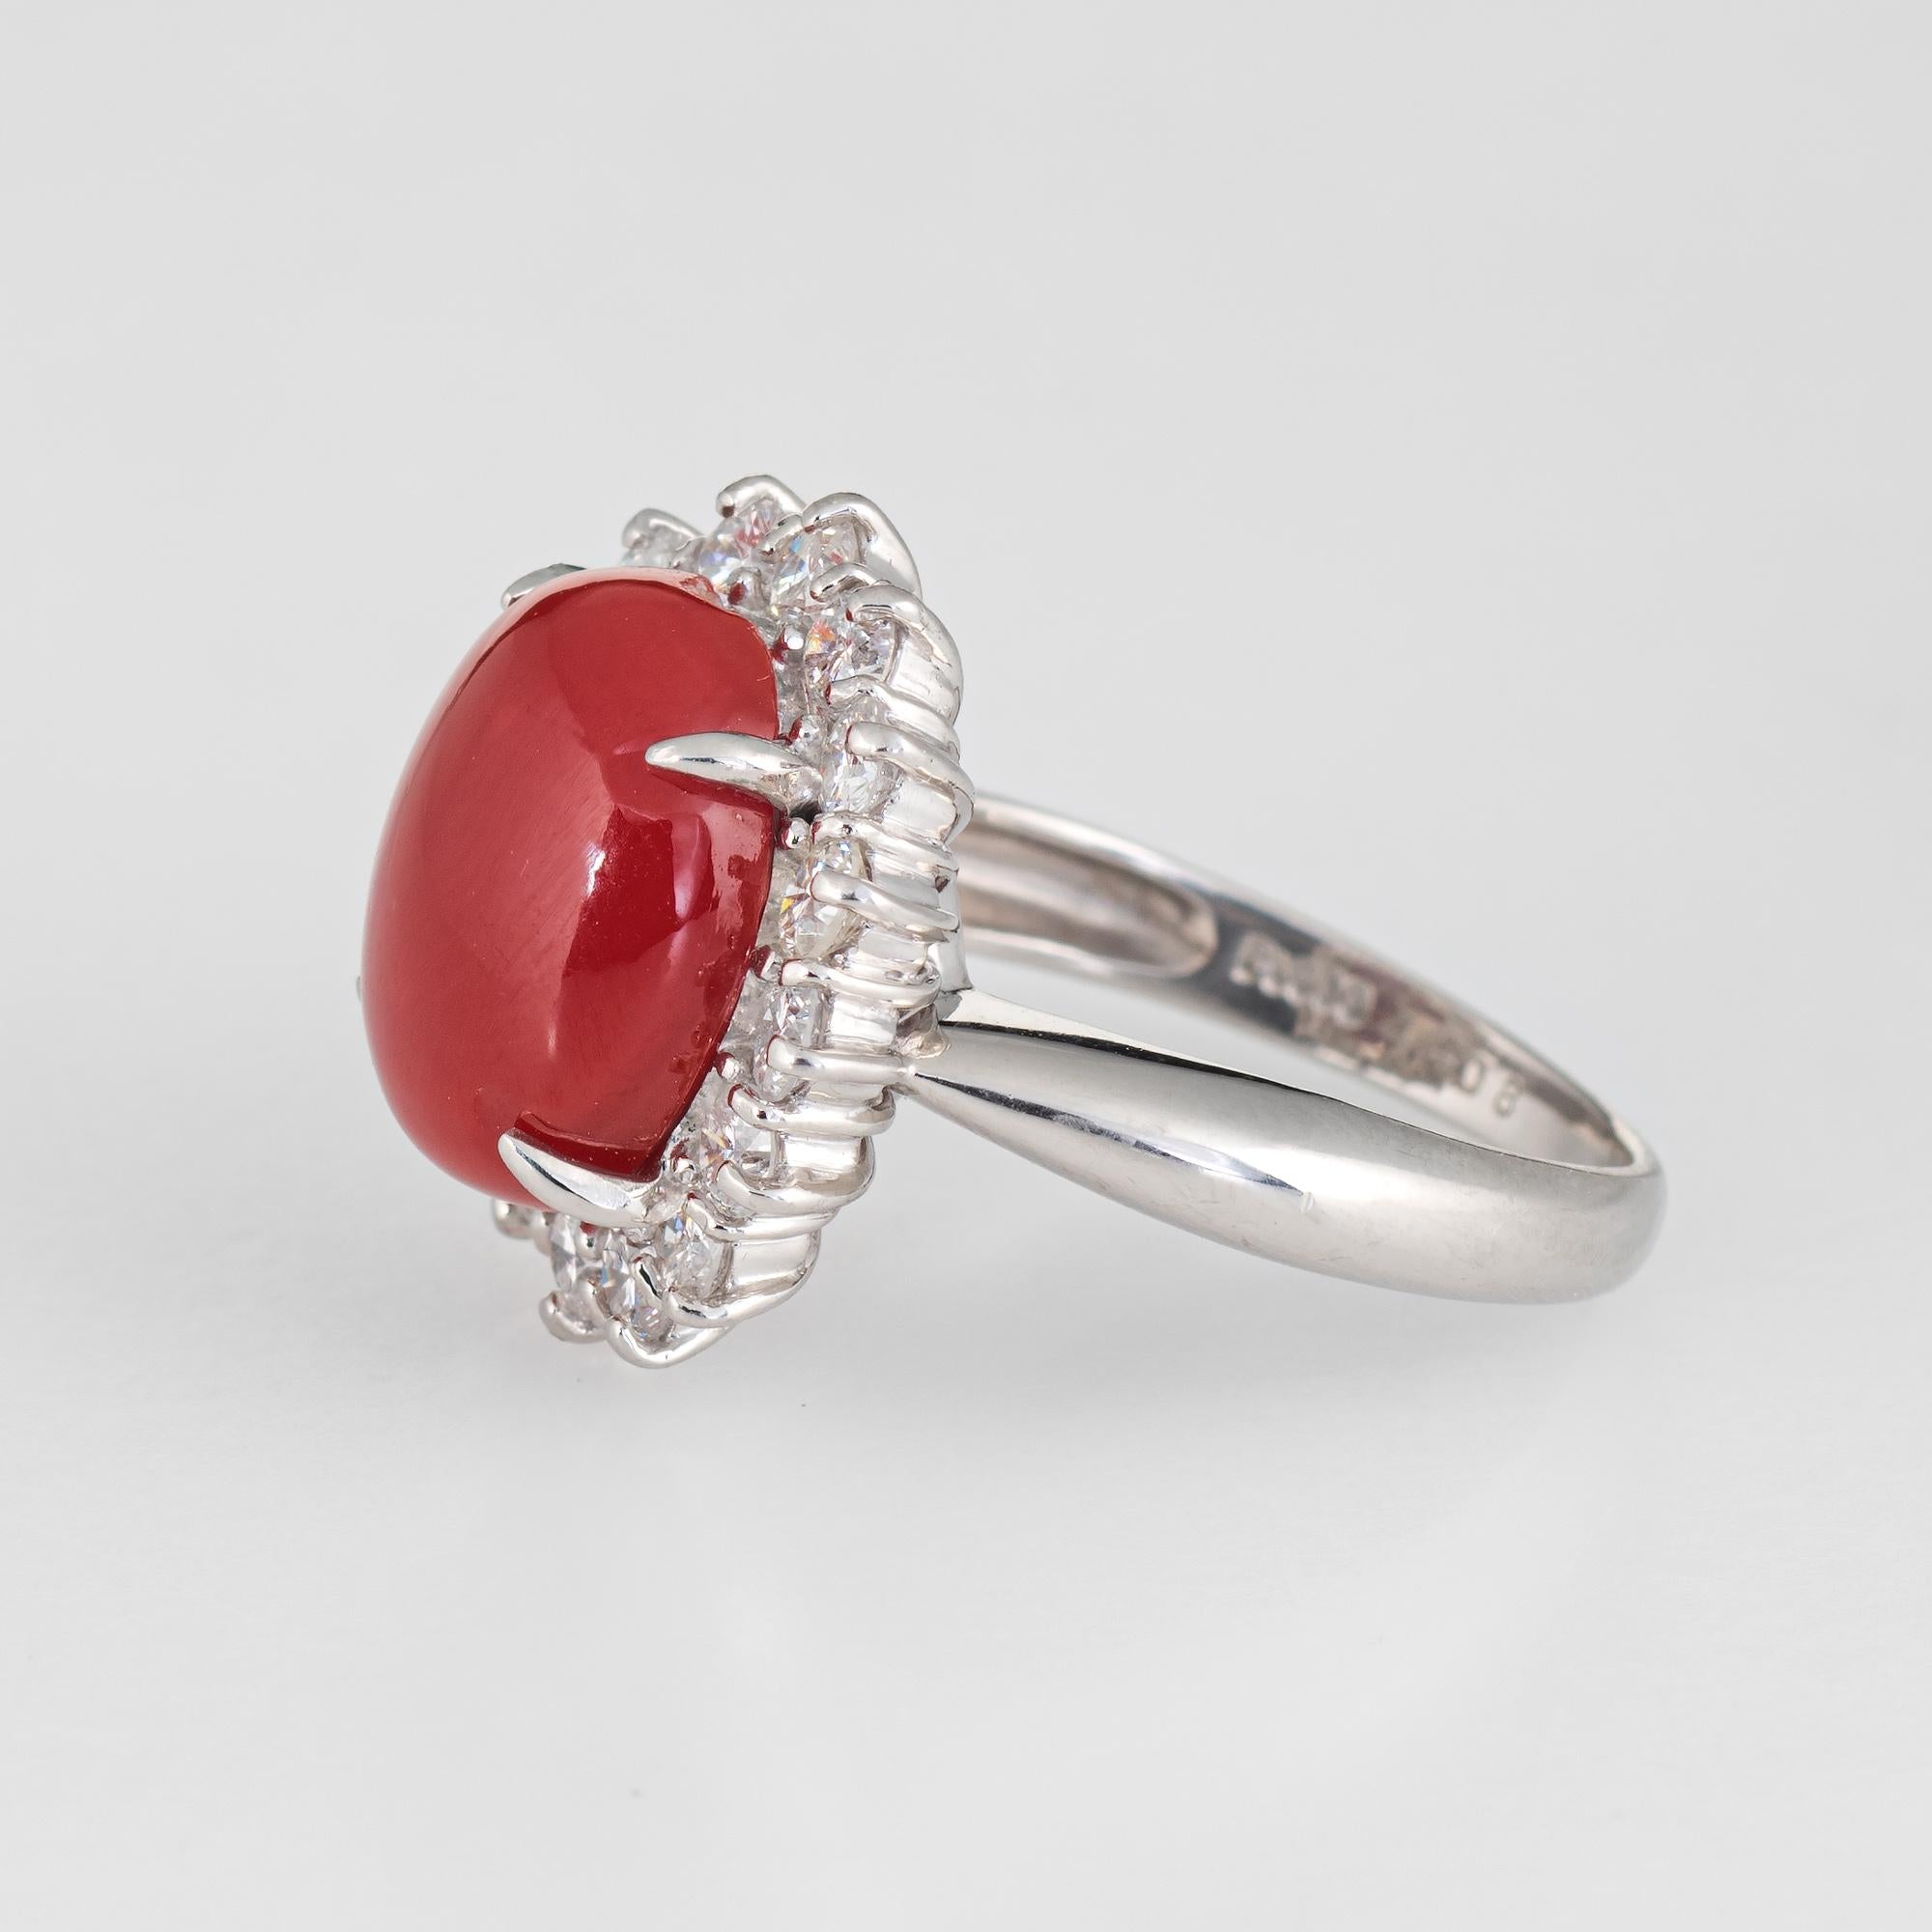 Oval Cut Ox Blood Red Coral Diamond Ring Estate Platinum Cocktail Jewelry Vintage 5.75